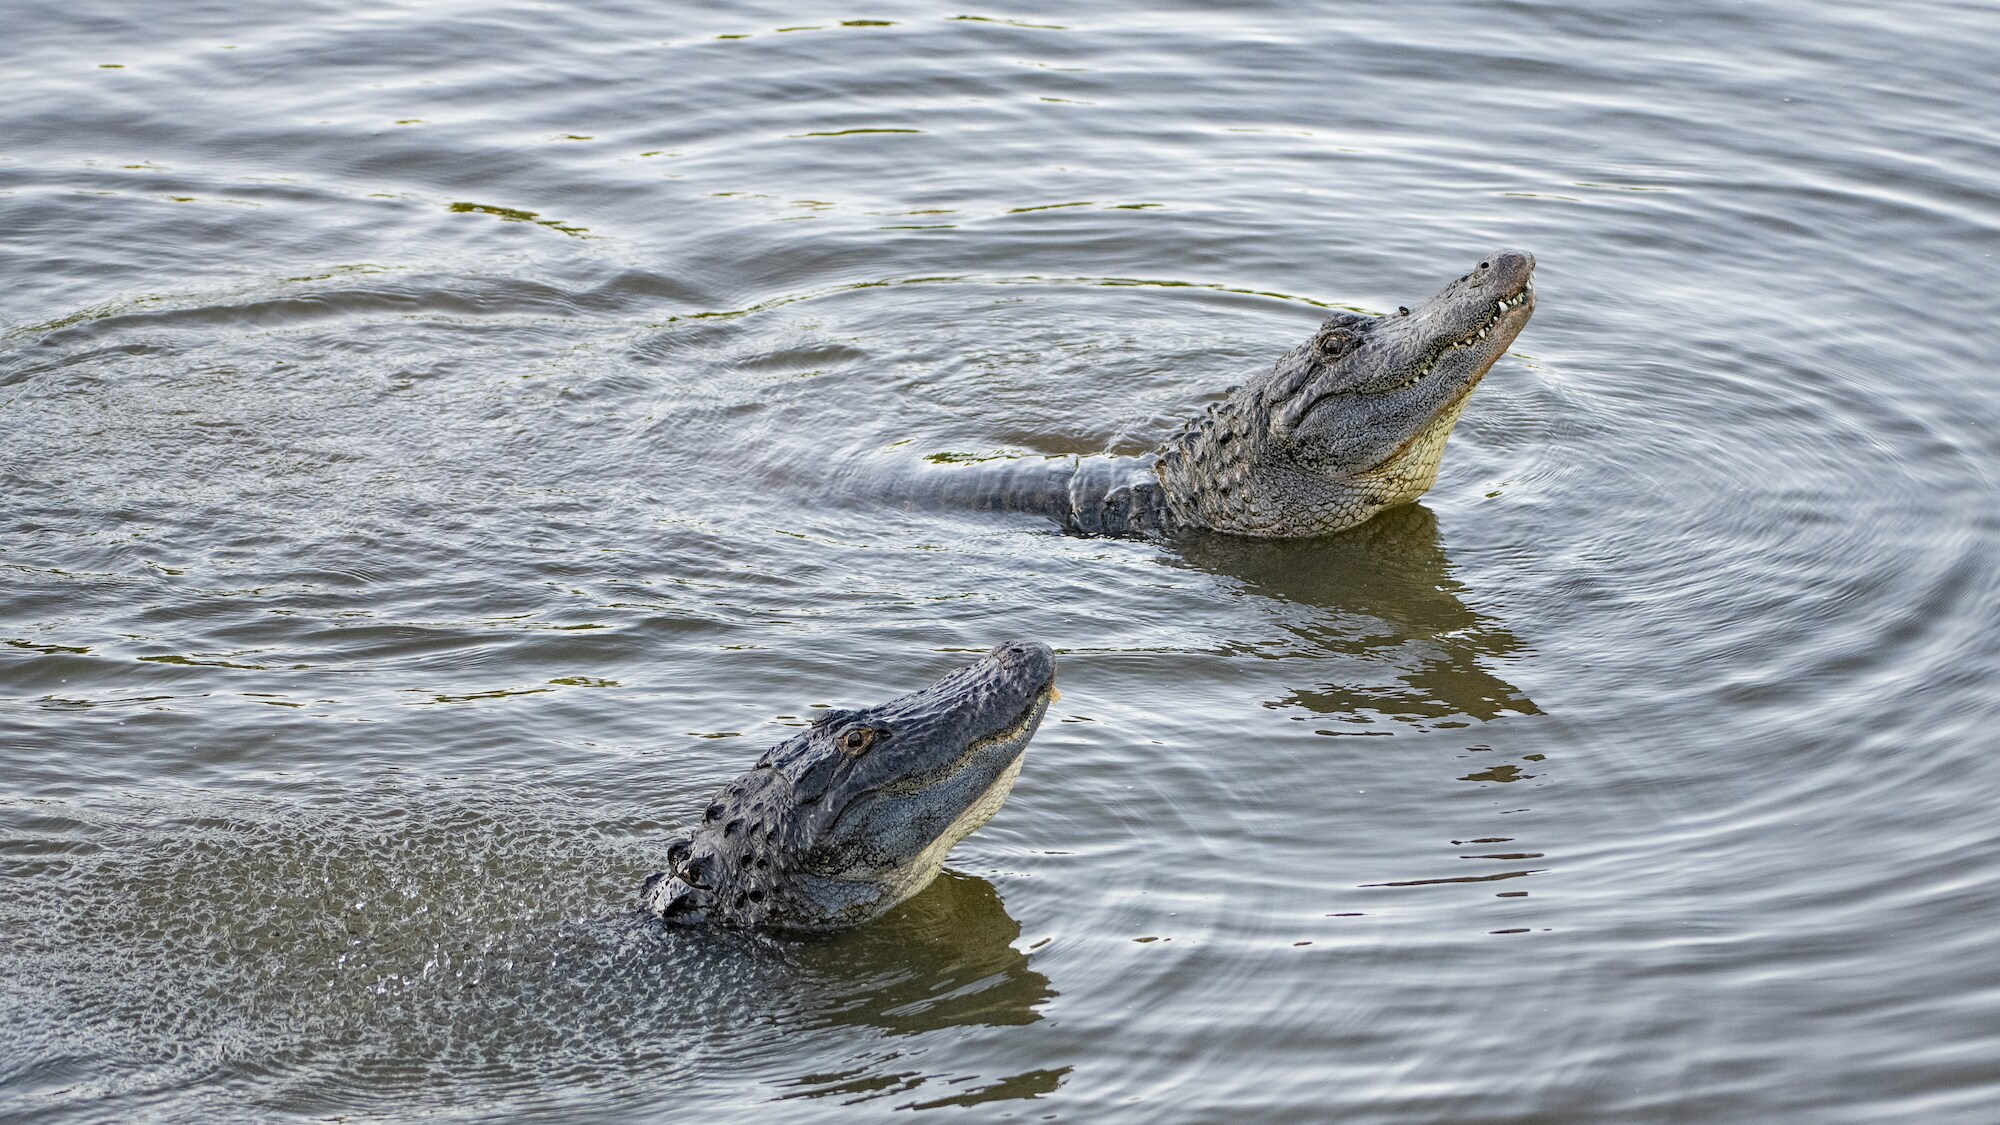 Male alligators performing their water dance.(National Geographic for Disney+/Mark Emery)